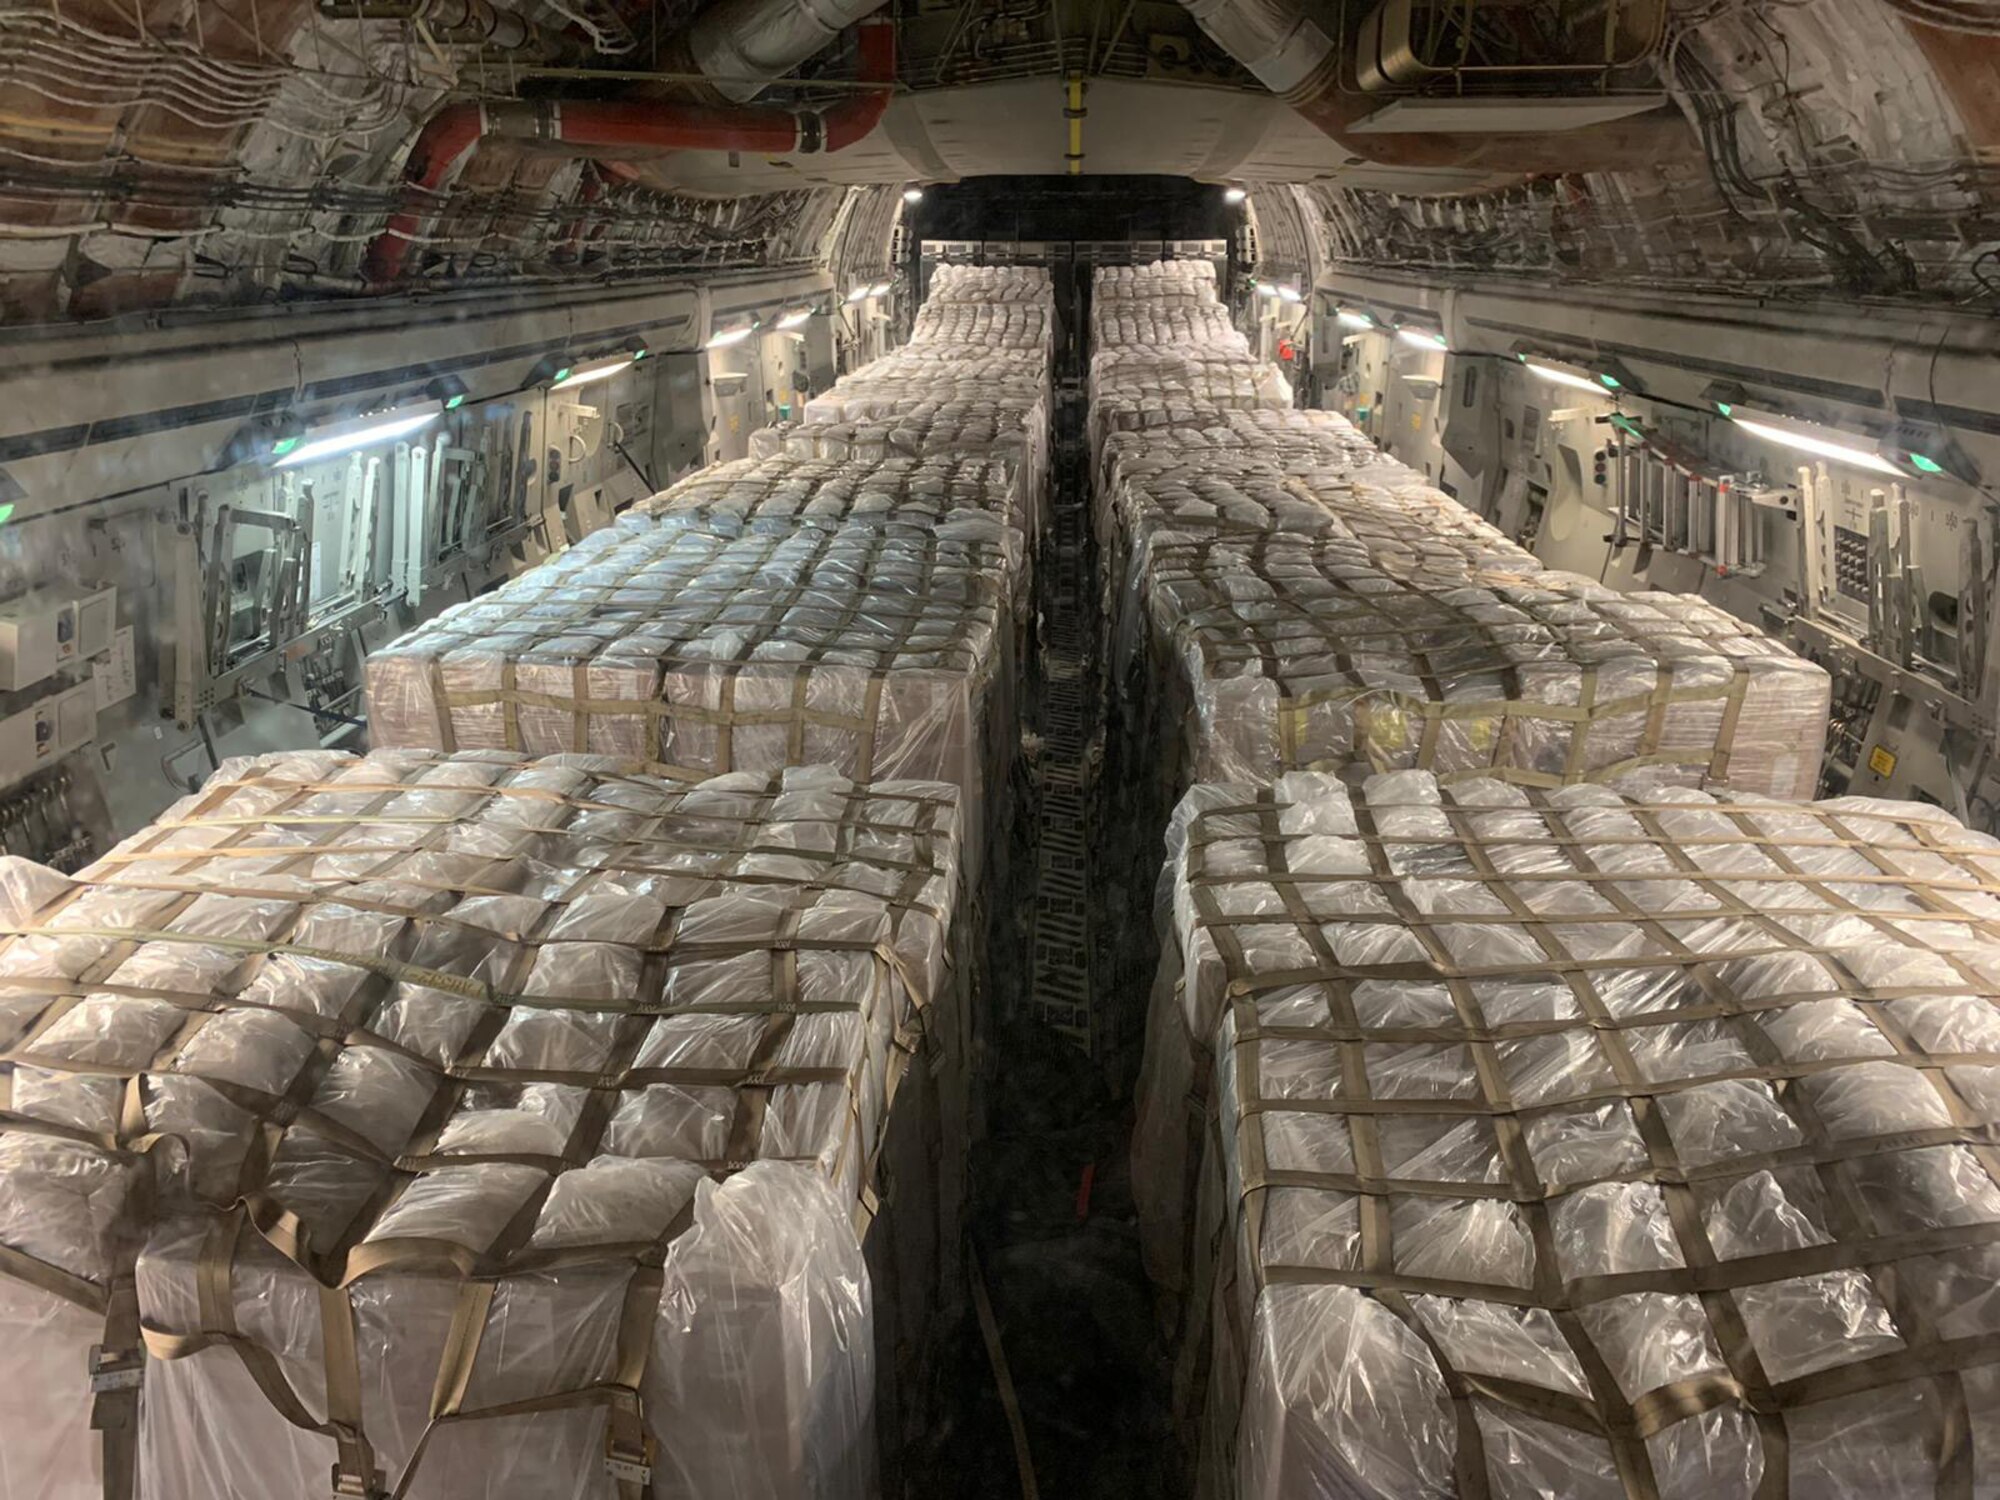 Eighteen pallets filled with more than 970,000 swab kits from Aviano, Italy are flown to Memphis, Tennessee for distribution to various locations to be used for testing of the Coronavirus April 4, 2020. (Courtesy Photo)